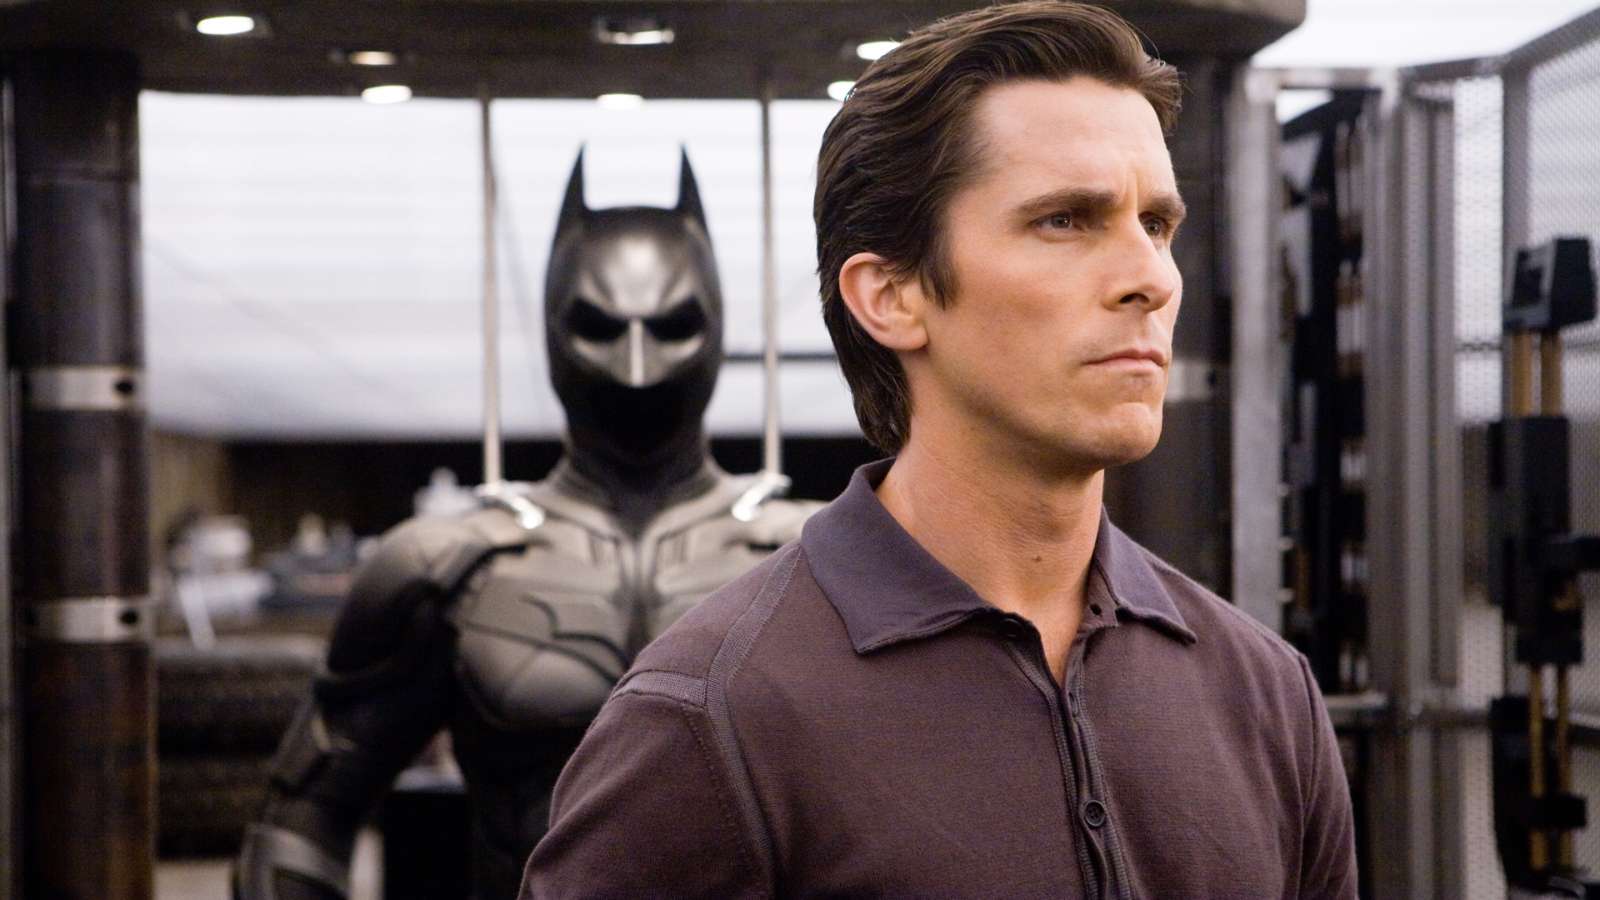 Christian Bale as Bruce Wayne in The Dark Knight, standing in front of the Batman suit